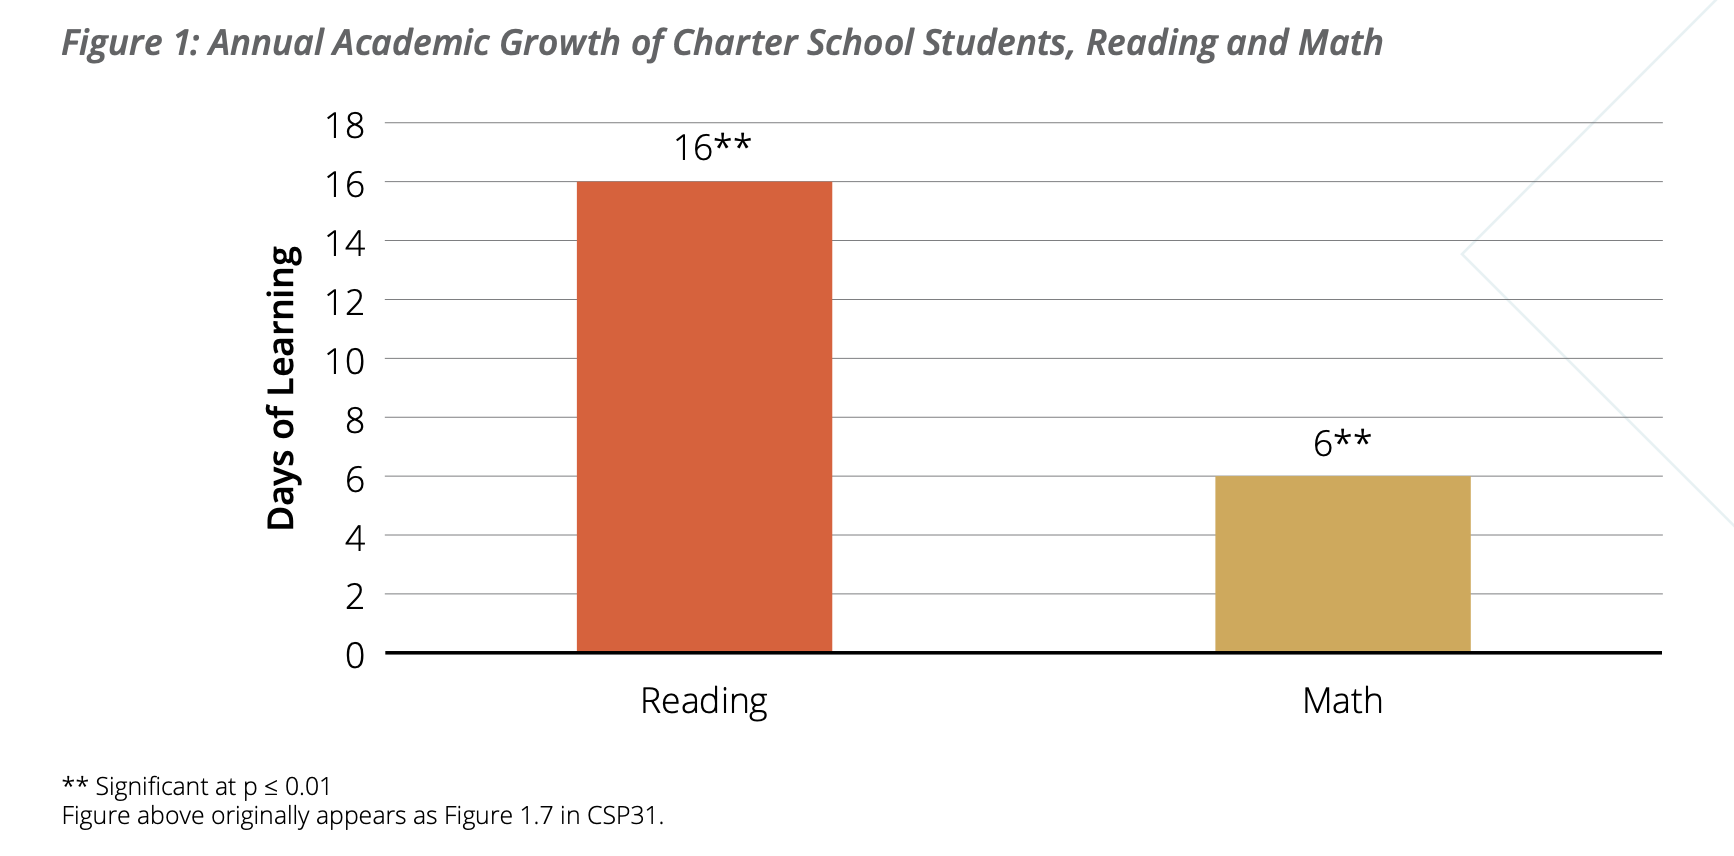 A bar graph with two bars that shows the additional days of instruction that charter school students nationally gained in reading and math per year. The reading bar shows 16 extra days. The math bar shows 6 extra days. Both numbers are marked as statistically significant.